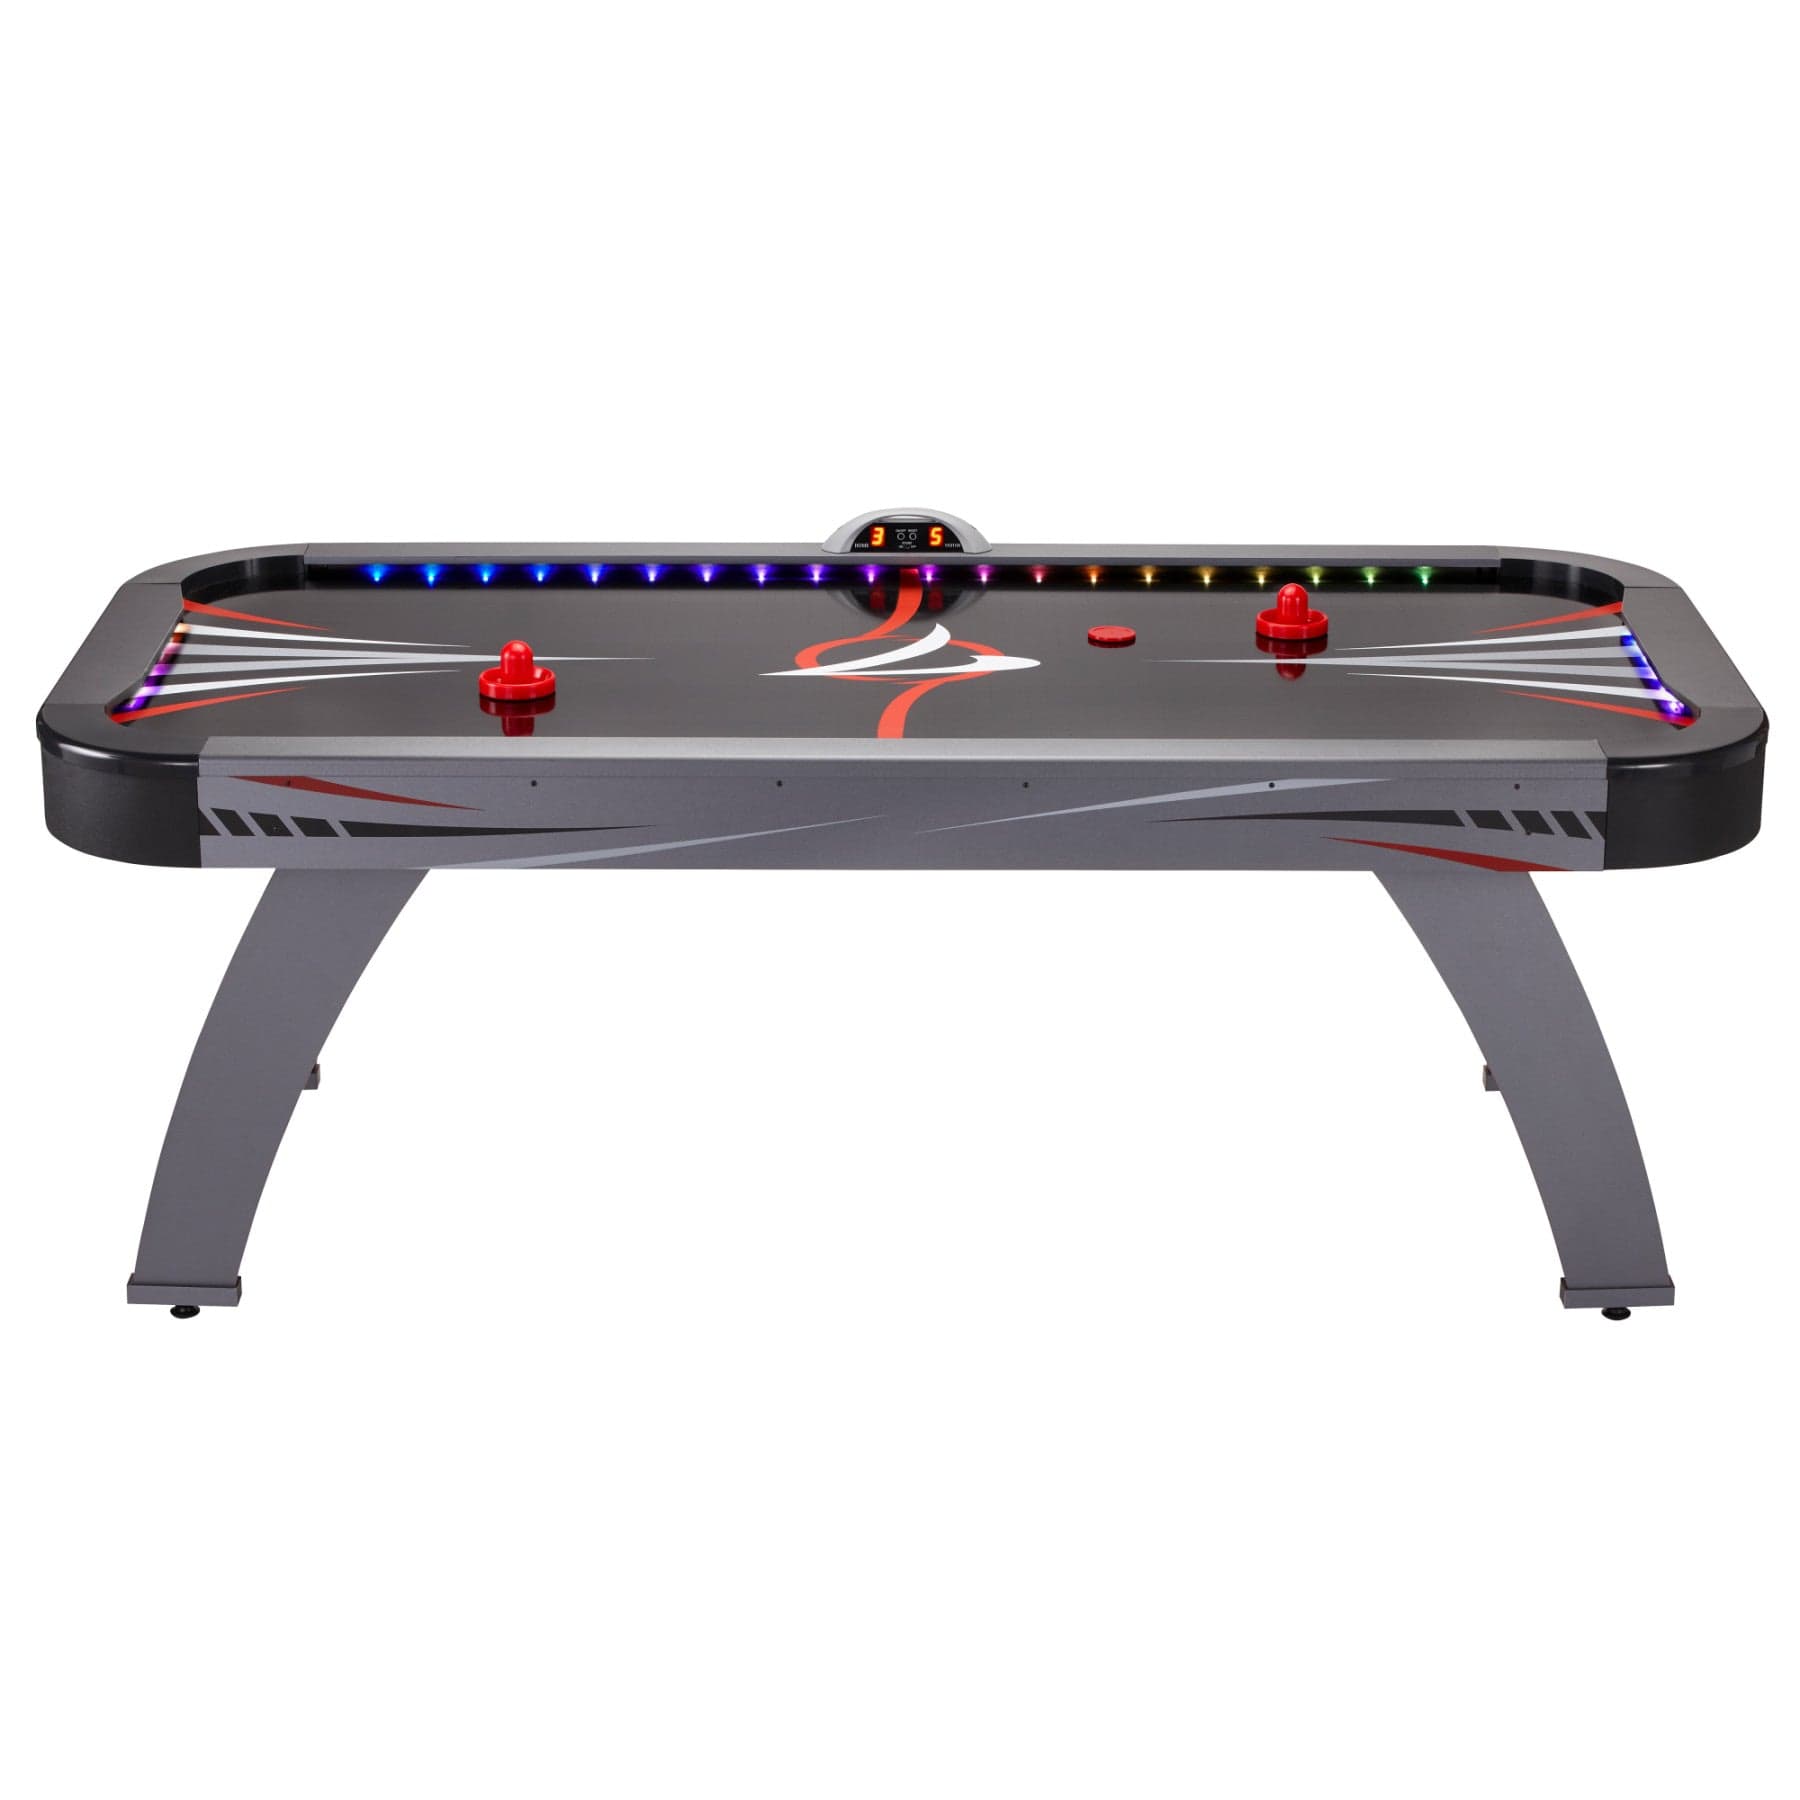 Fat Cat 64-3014  Volt LED Illuminated Air Hockey Table - Atomic Game Store